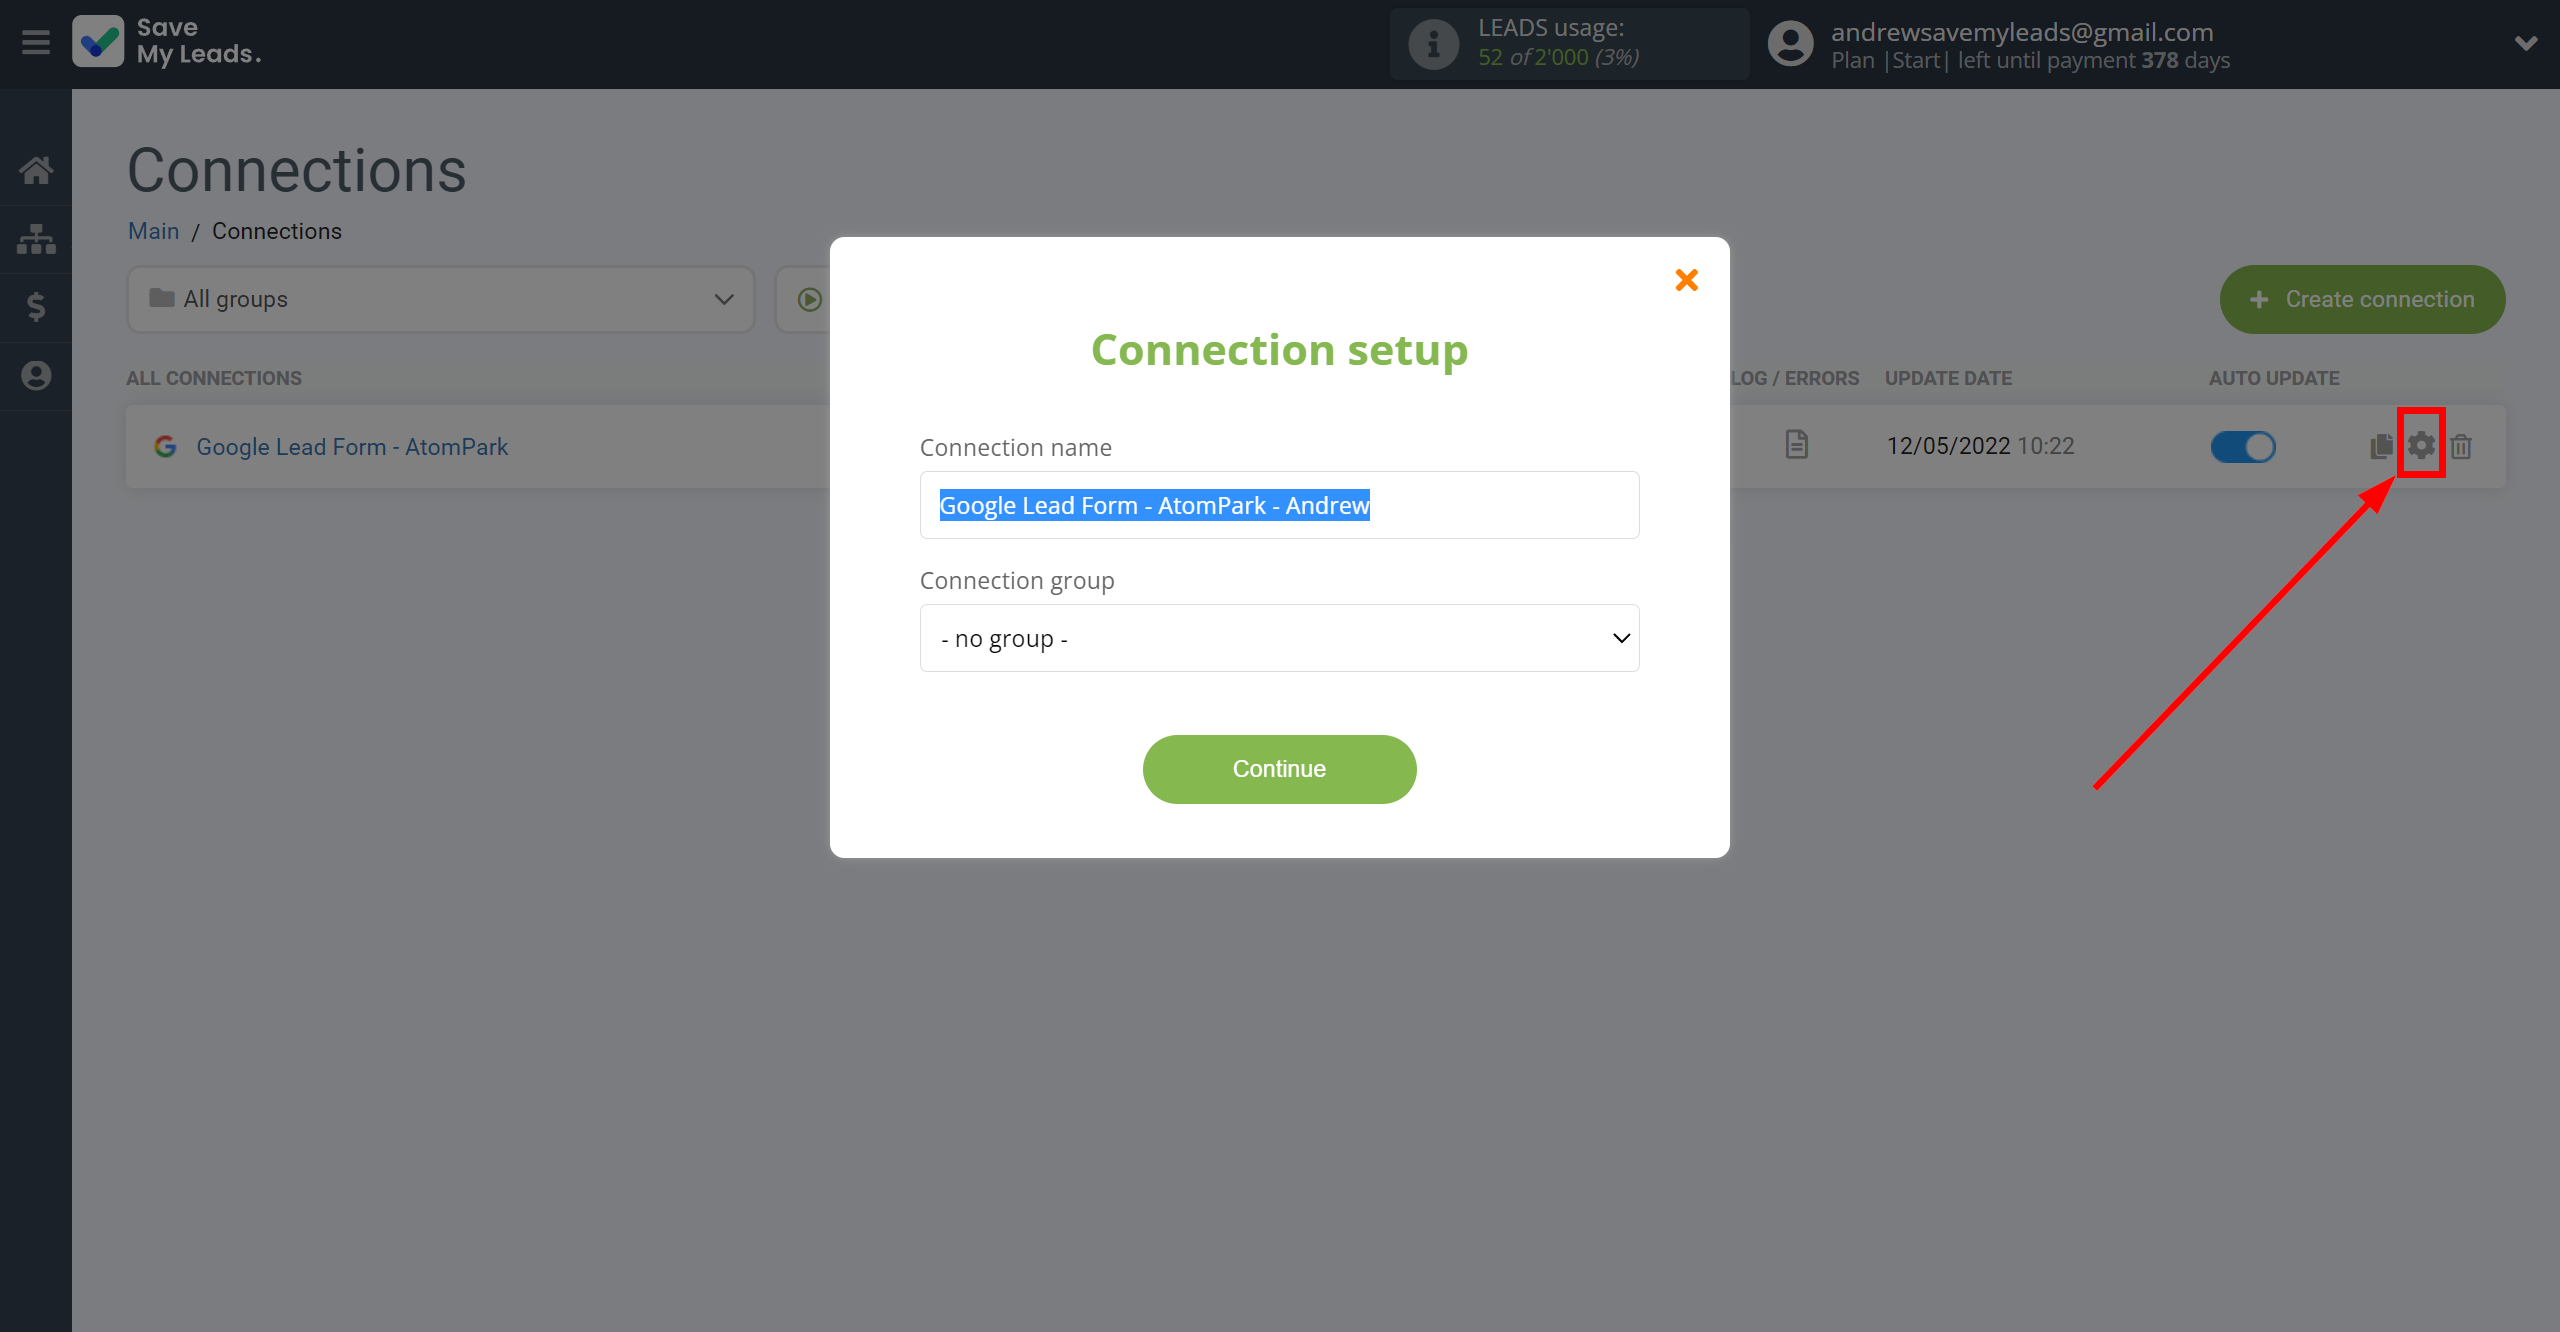 How to Connect Google Lead Form with AtomPark | Name and group connection